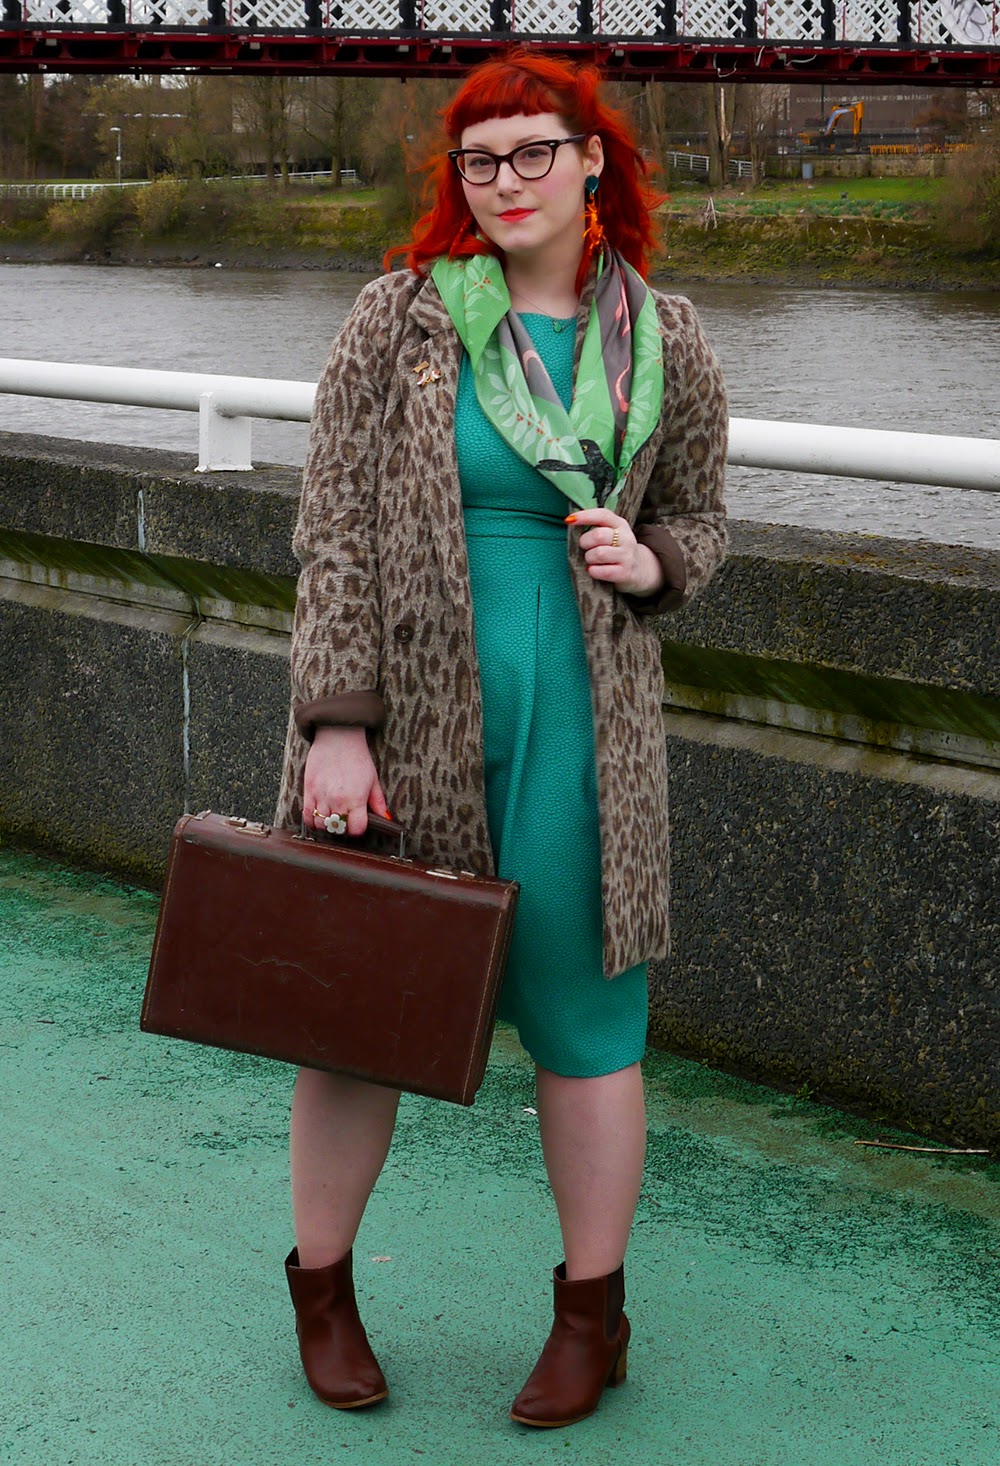 Glasgow, Girl Gang, Girl Gang Weekender, Glasgow, Clyde side, Scottish Bloggers, Scottish street style, styled by Helen, Creature Feature style, red head, red haired blogger, Lou Taylor ant earrings, H&M green dress, Karen Mabon scarf, Warehouse leopard print coat, vintage suitcase